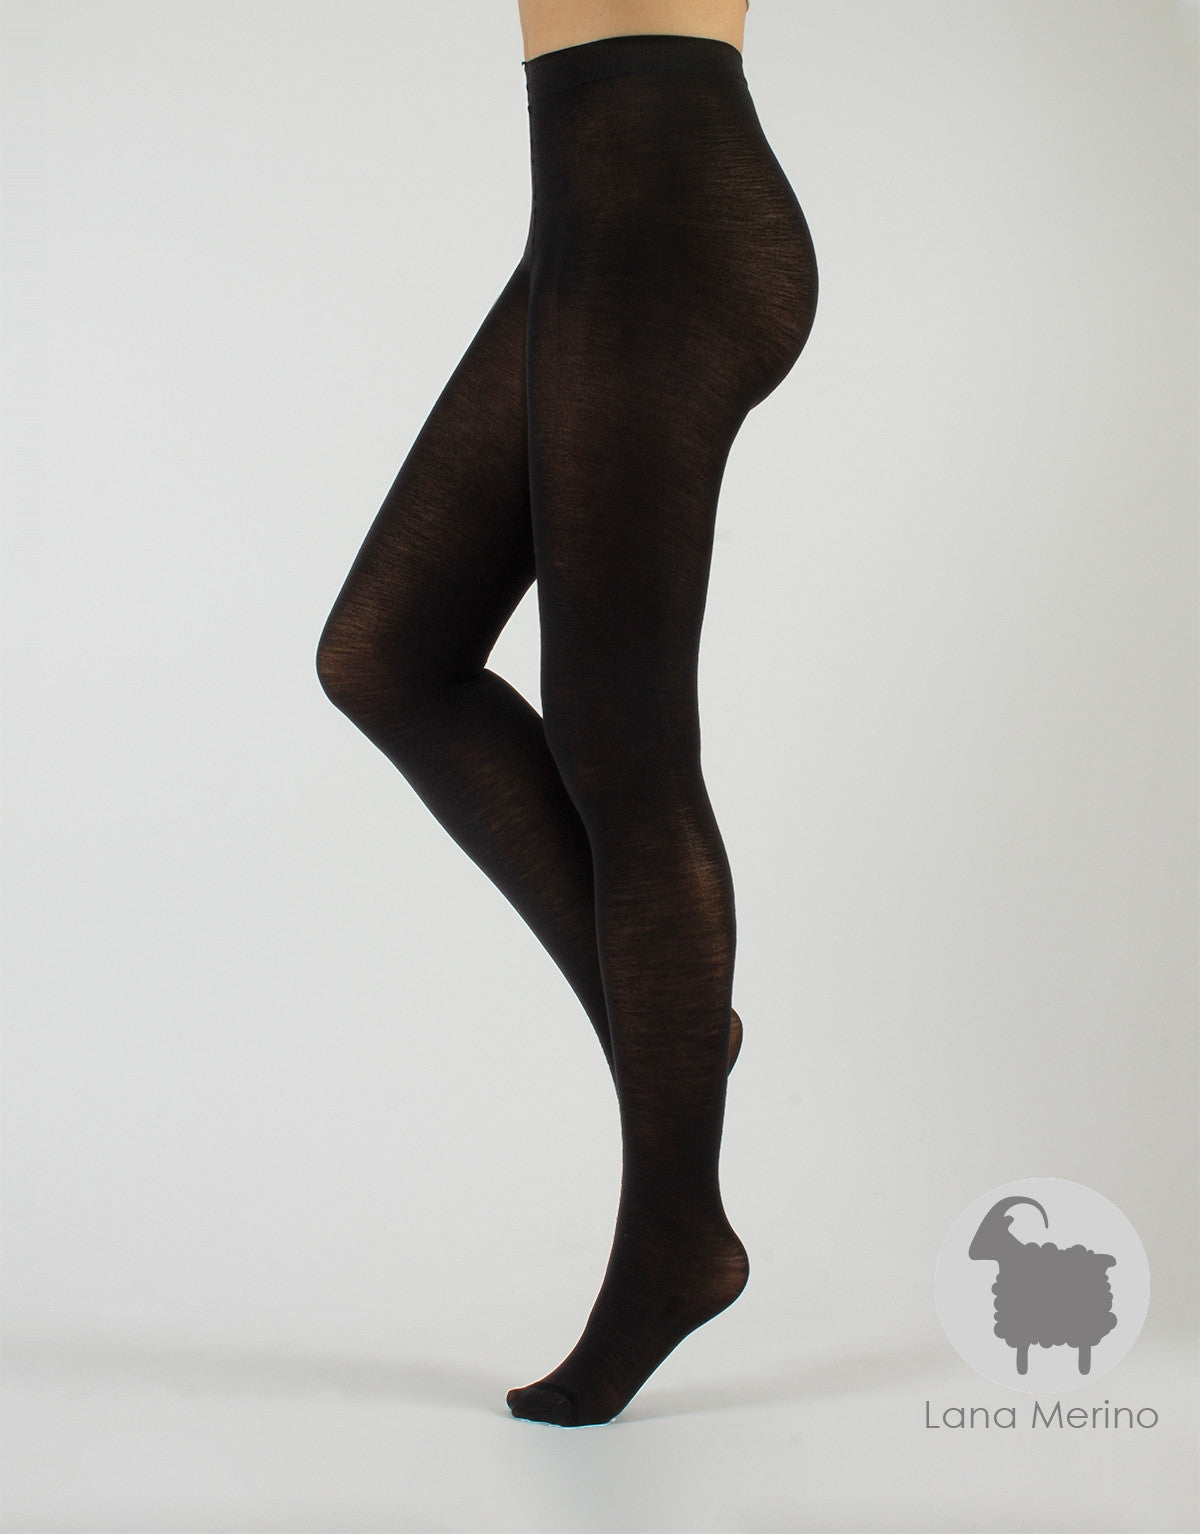 Calzitaly Black Merino Tights - Light and warm knitted thermal tights with deep waistband and gusset, perfect for cold Winters.